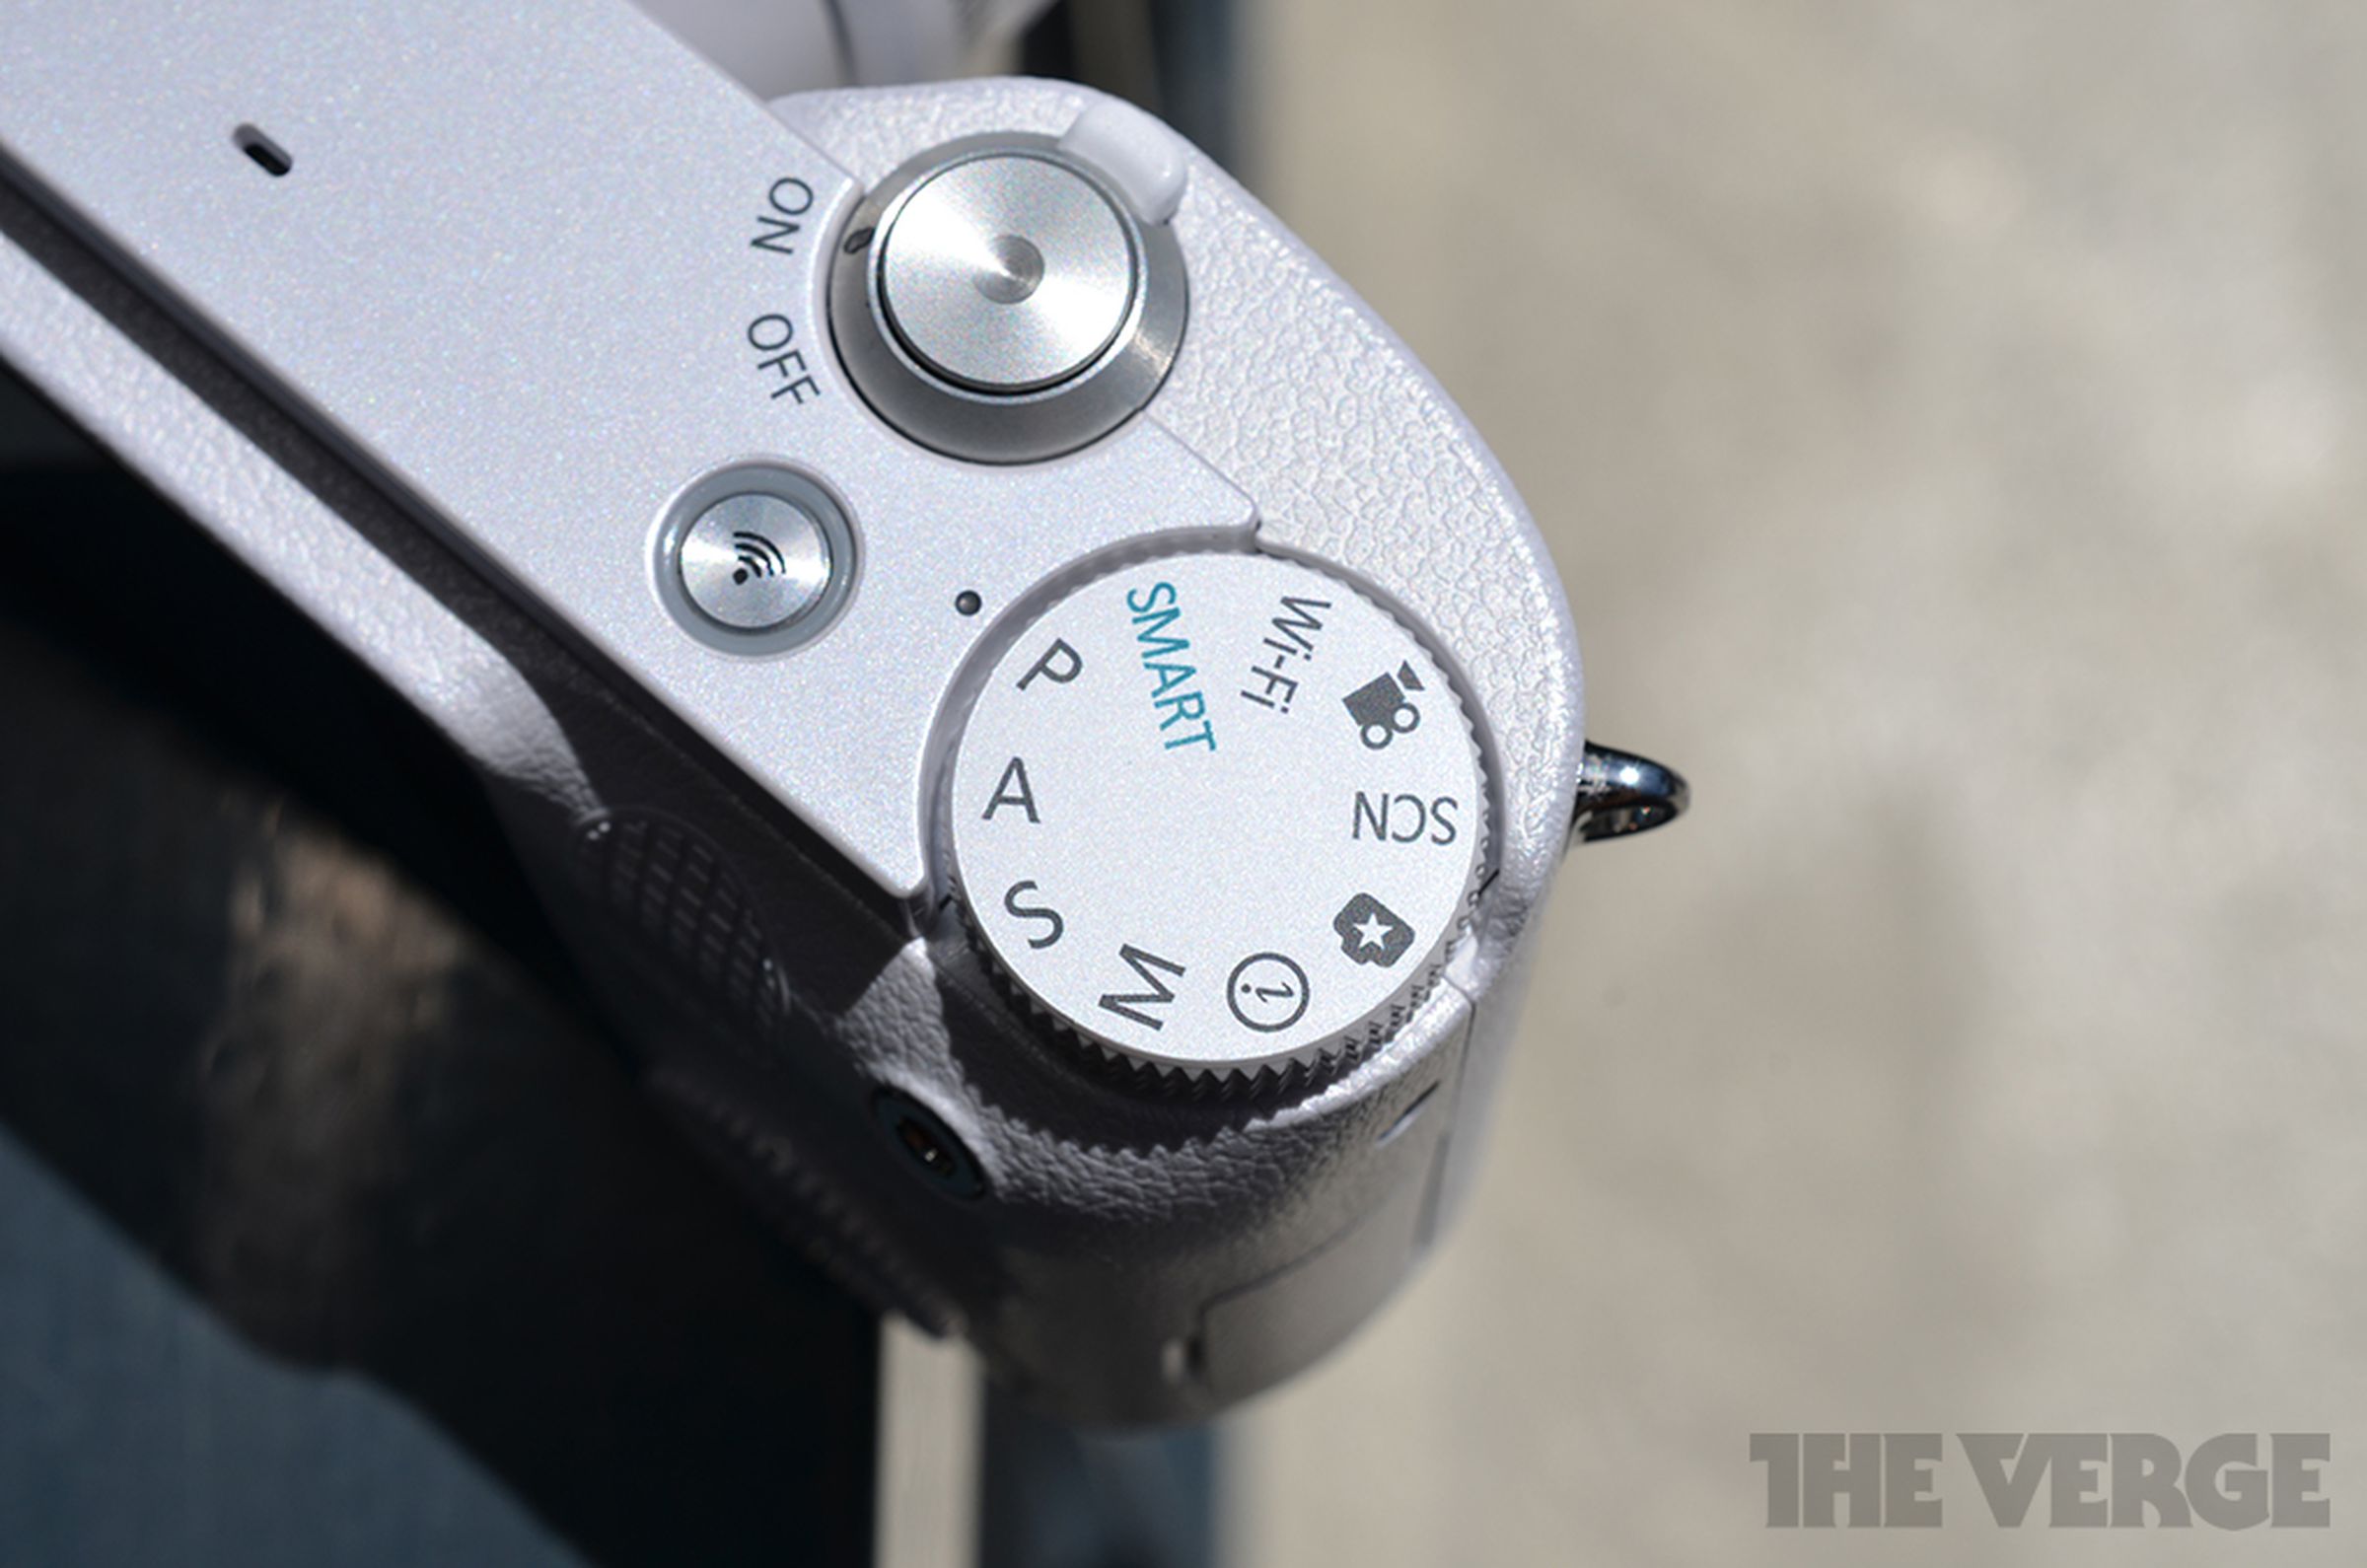 Samsung NX1000 hands-on pictures